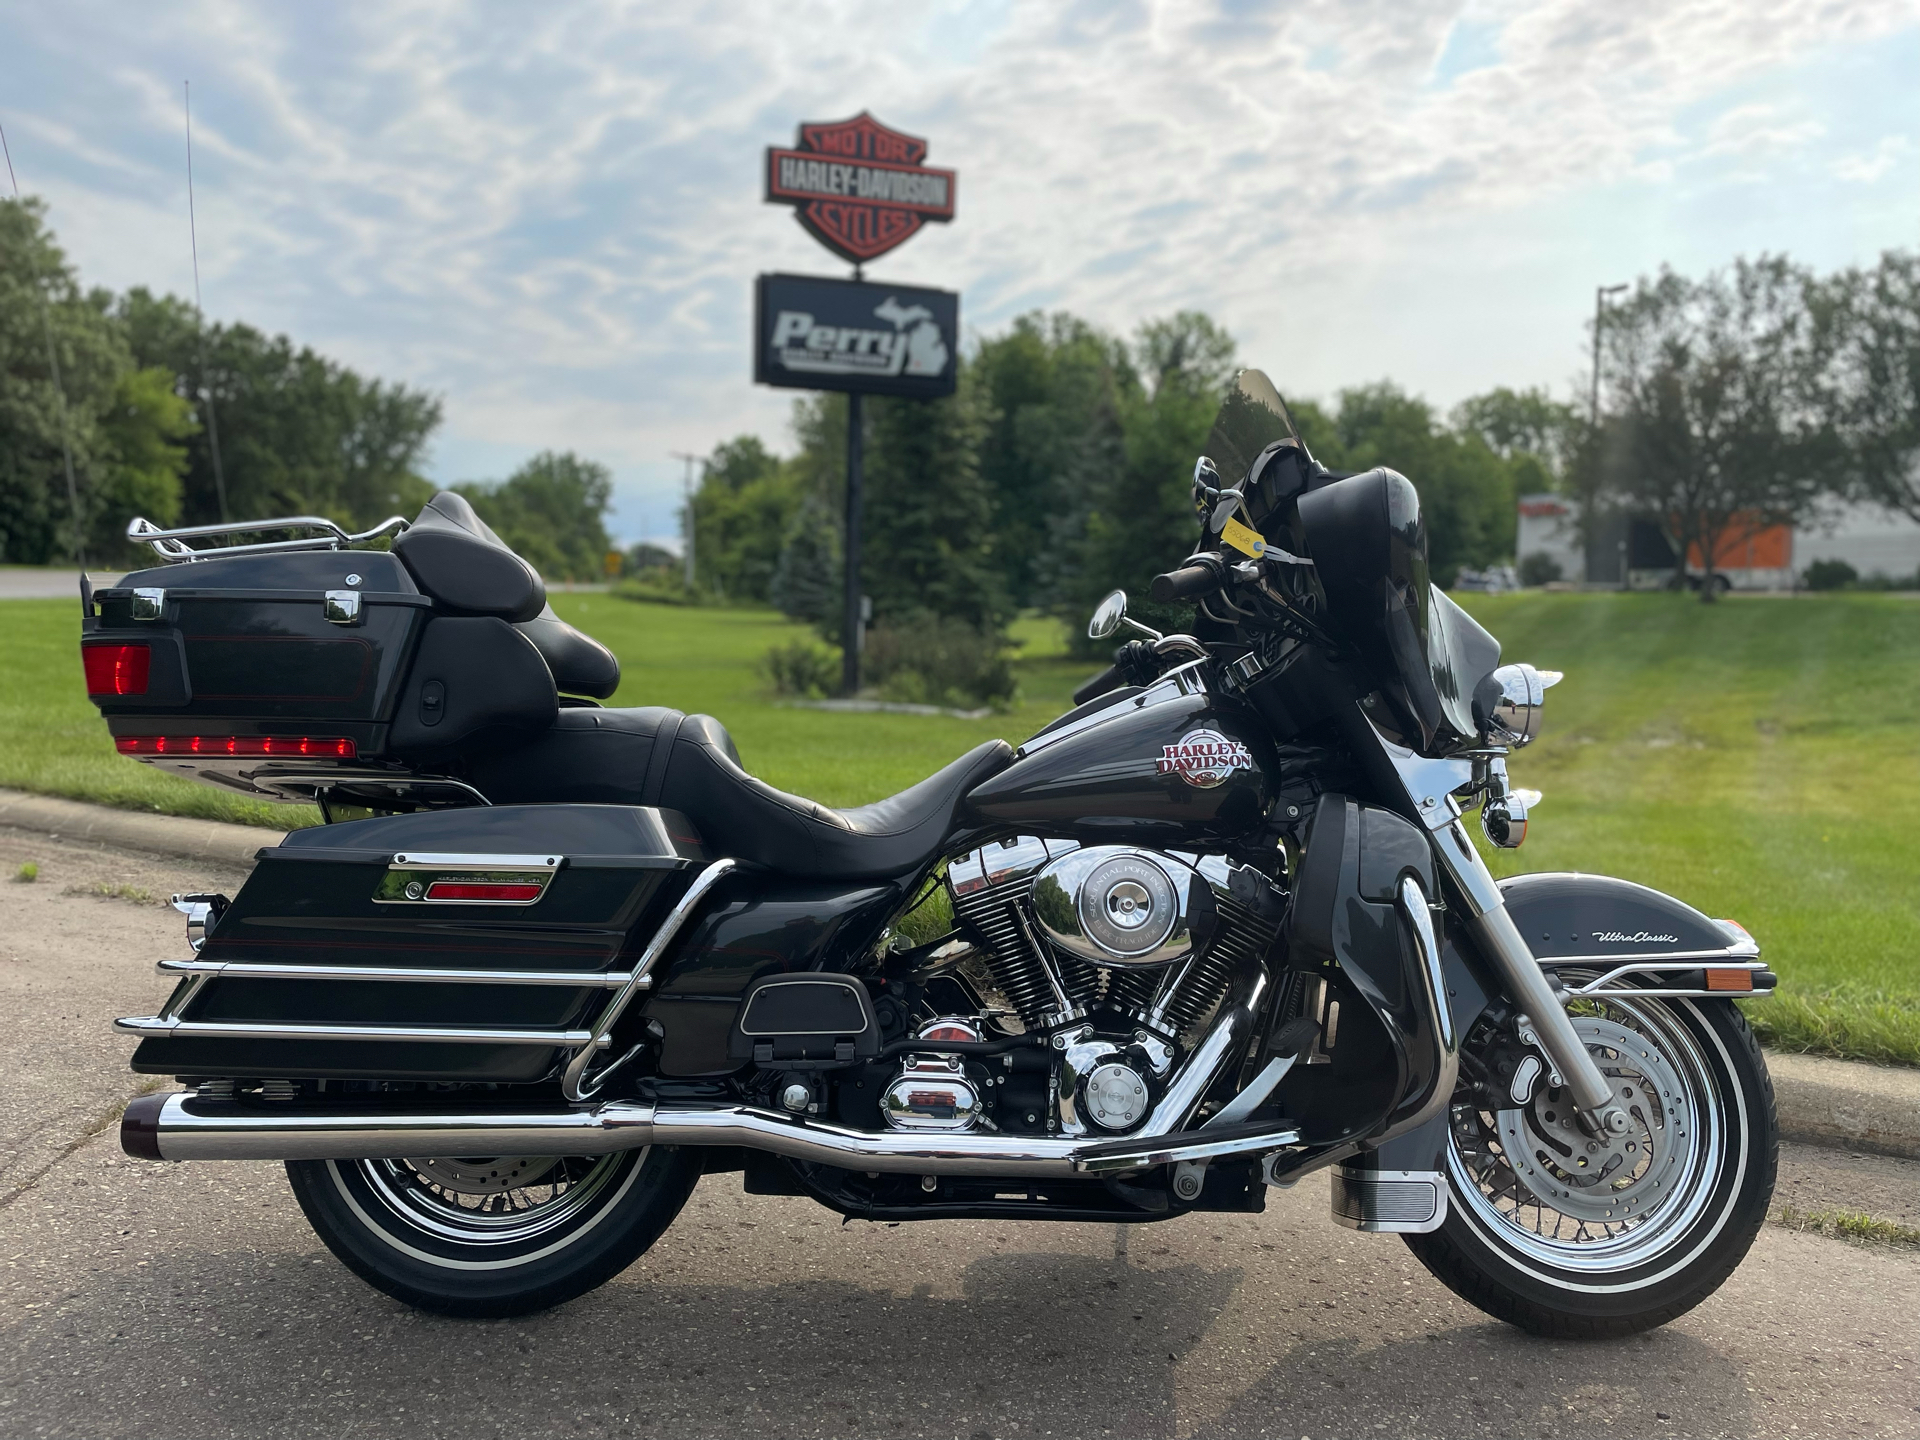 Used 2006 Harley Davidson Ultra Classic Electra Glide Motorcycles In Portage Mi 699088 Black Pearl